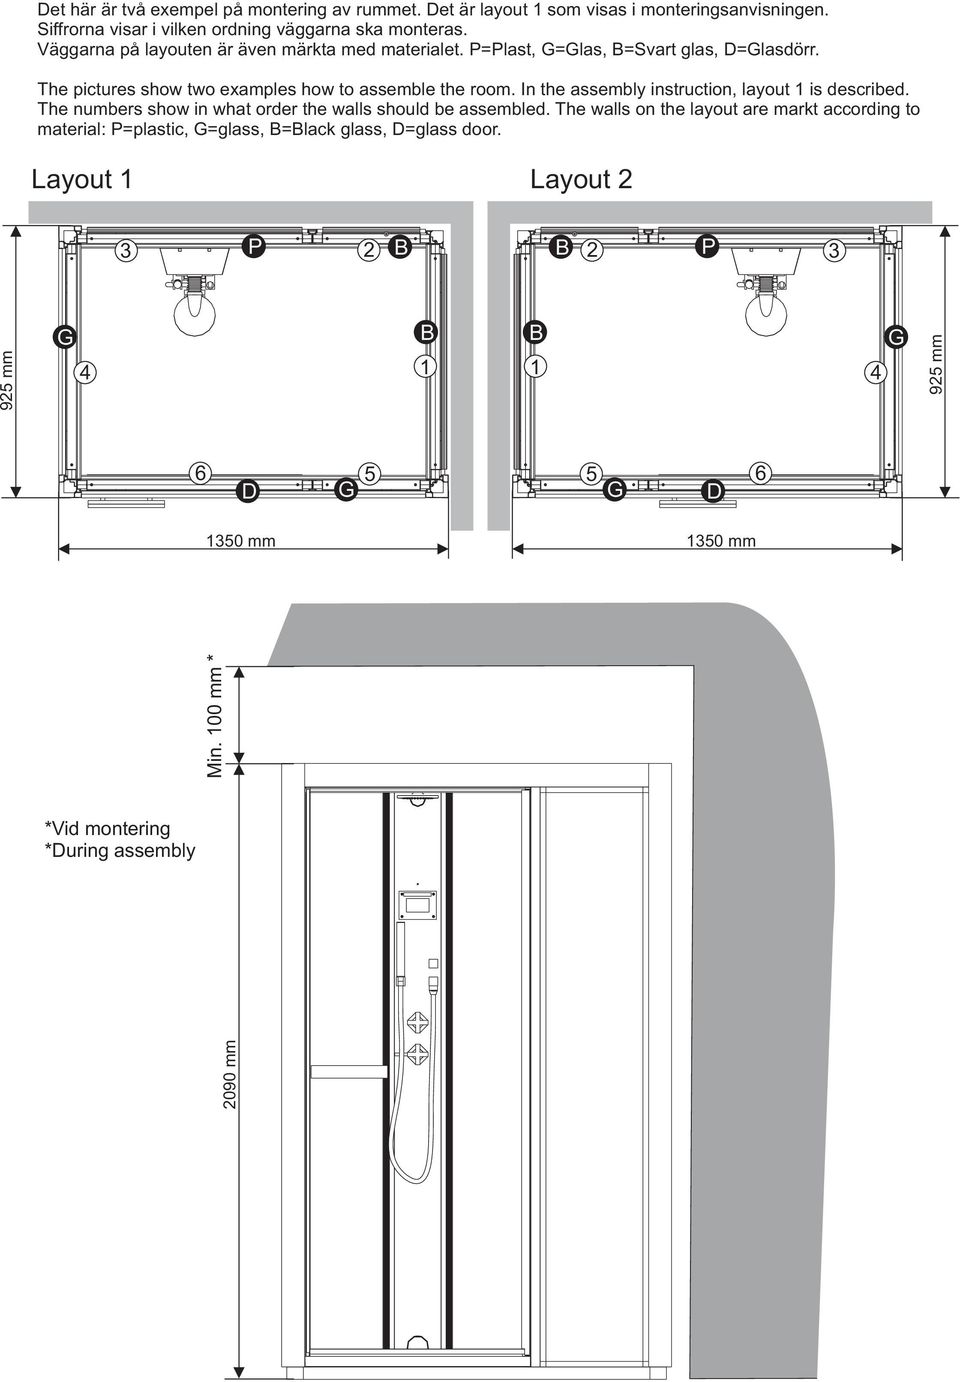 In the assembly instruction, layout 1 is described. The numbers show in what order the walls should be assembled.